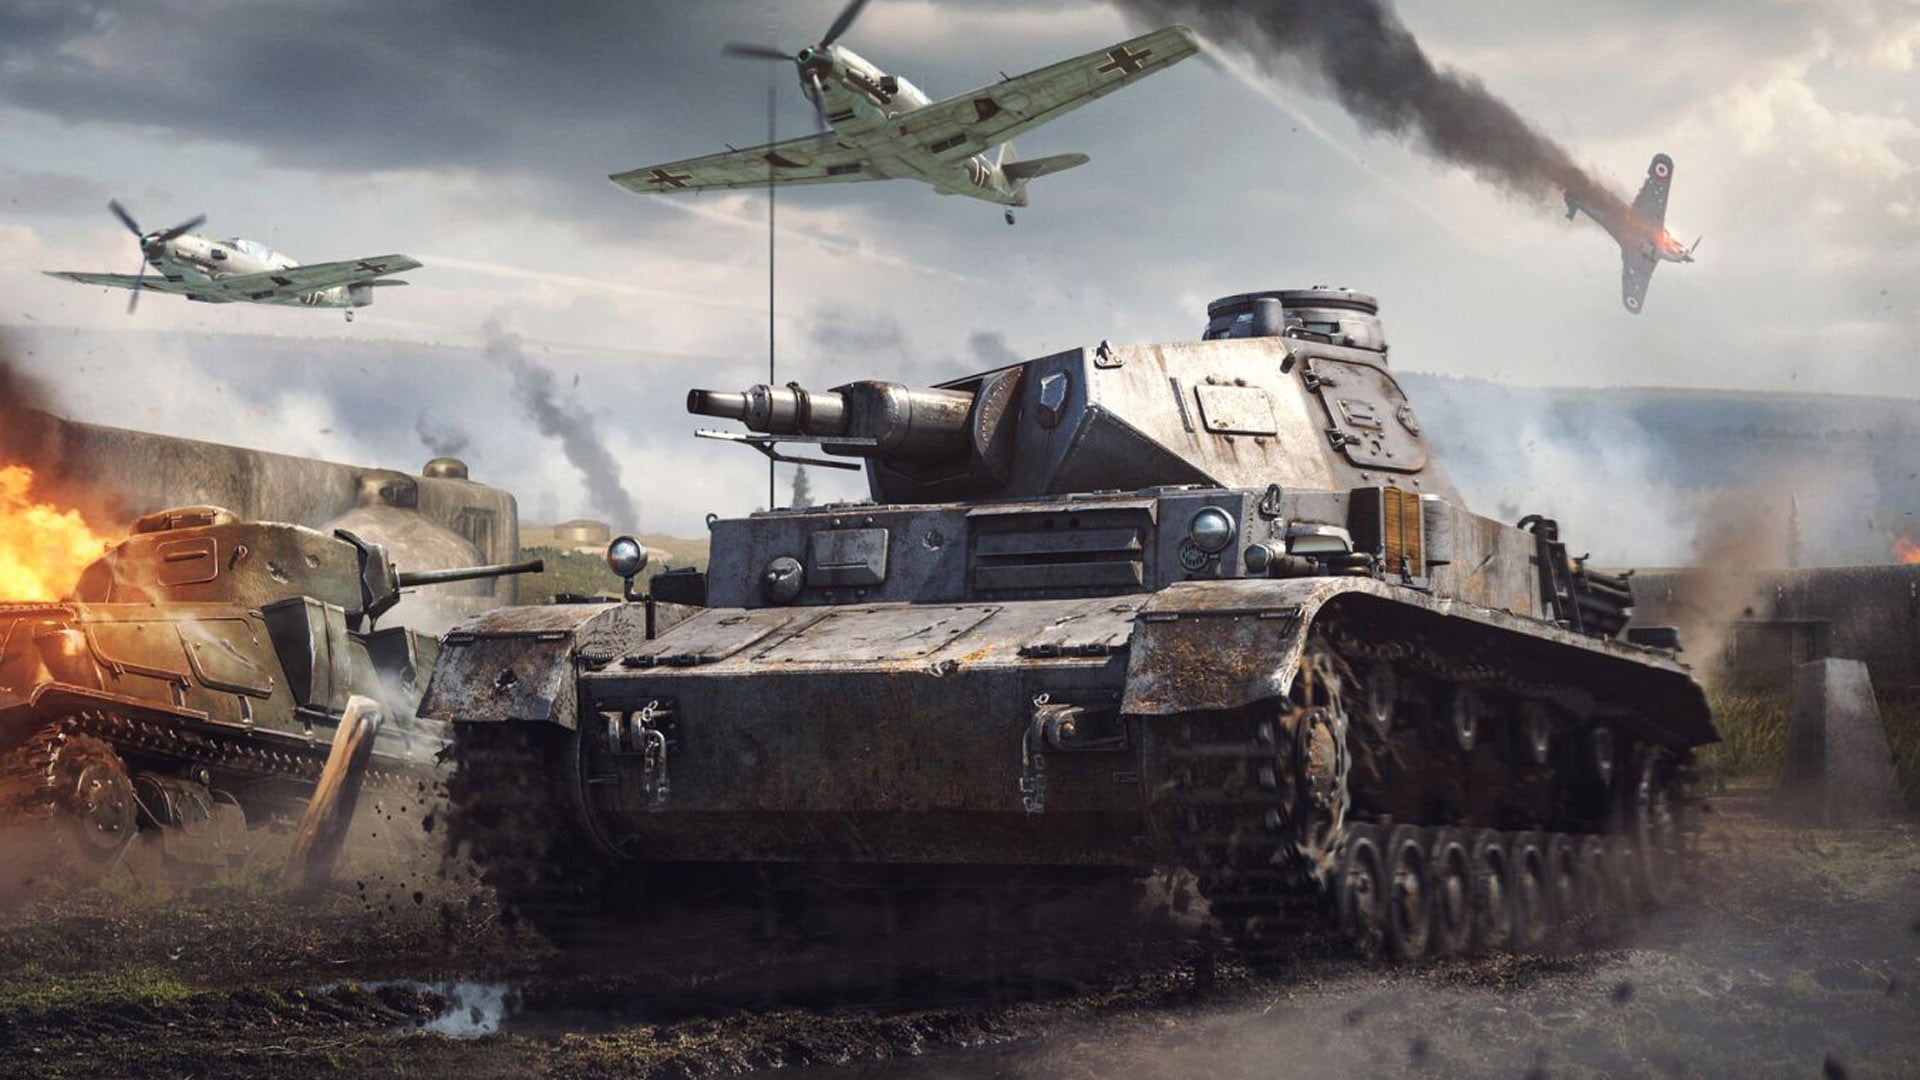 A screenshot of a war game depicting a real-world conflict with soldiers and tanks